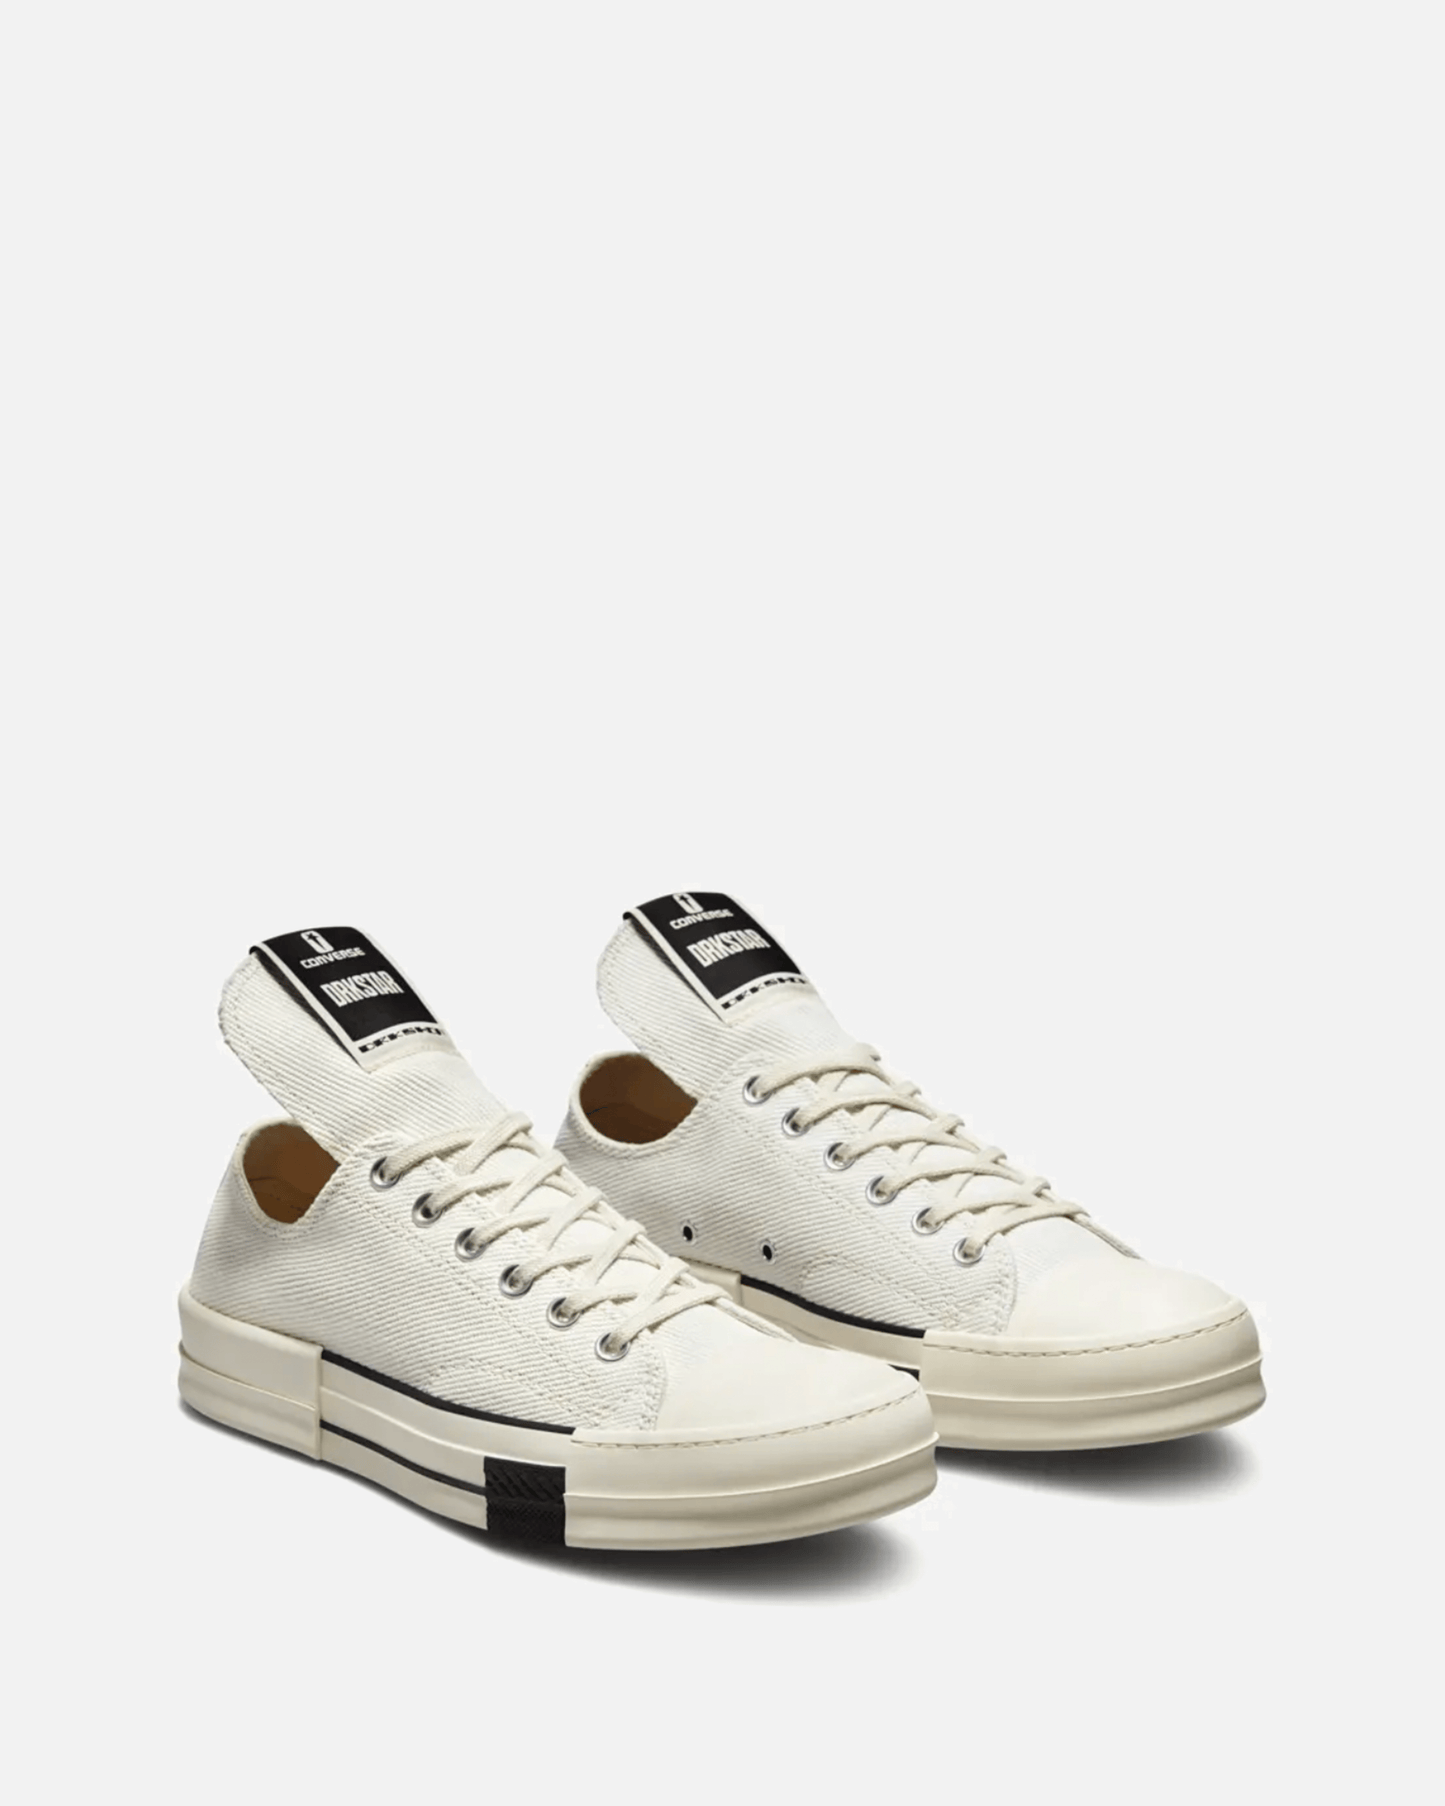 Rick Owens DRKSHDW Men's Shoes Converse Drkstar Ox in Lily White/White